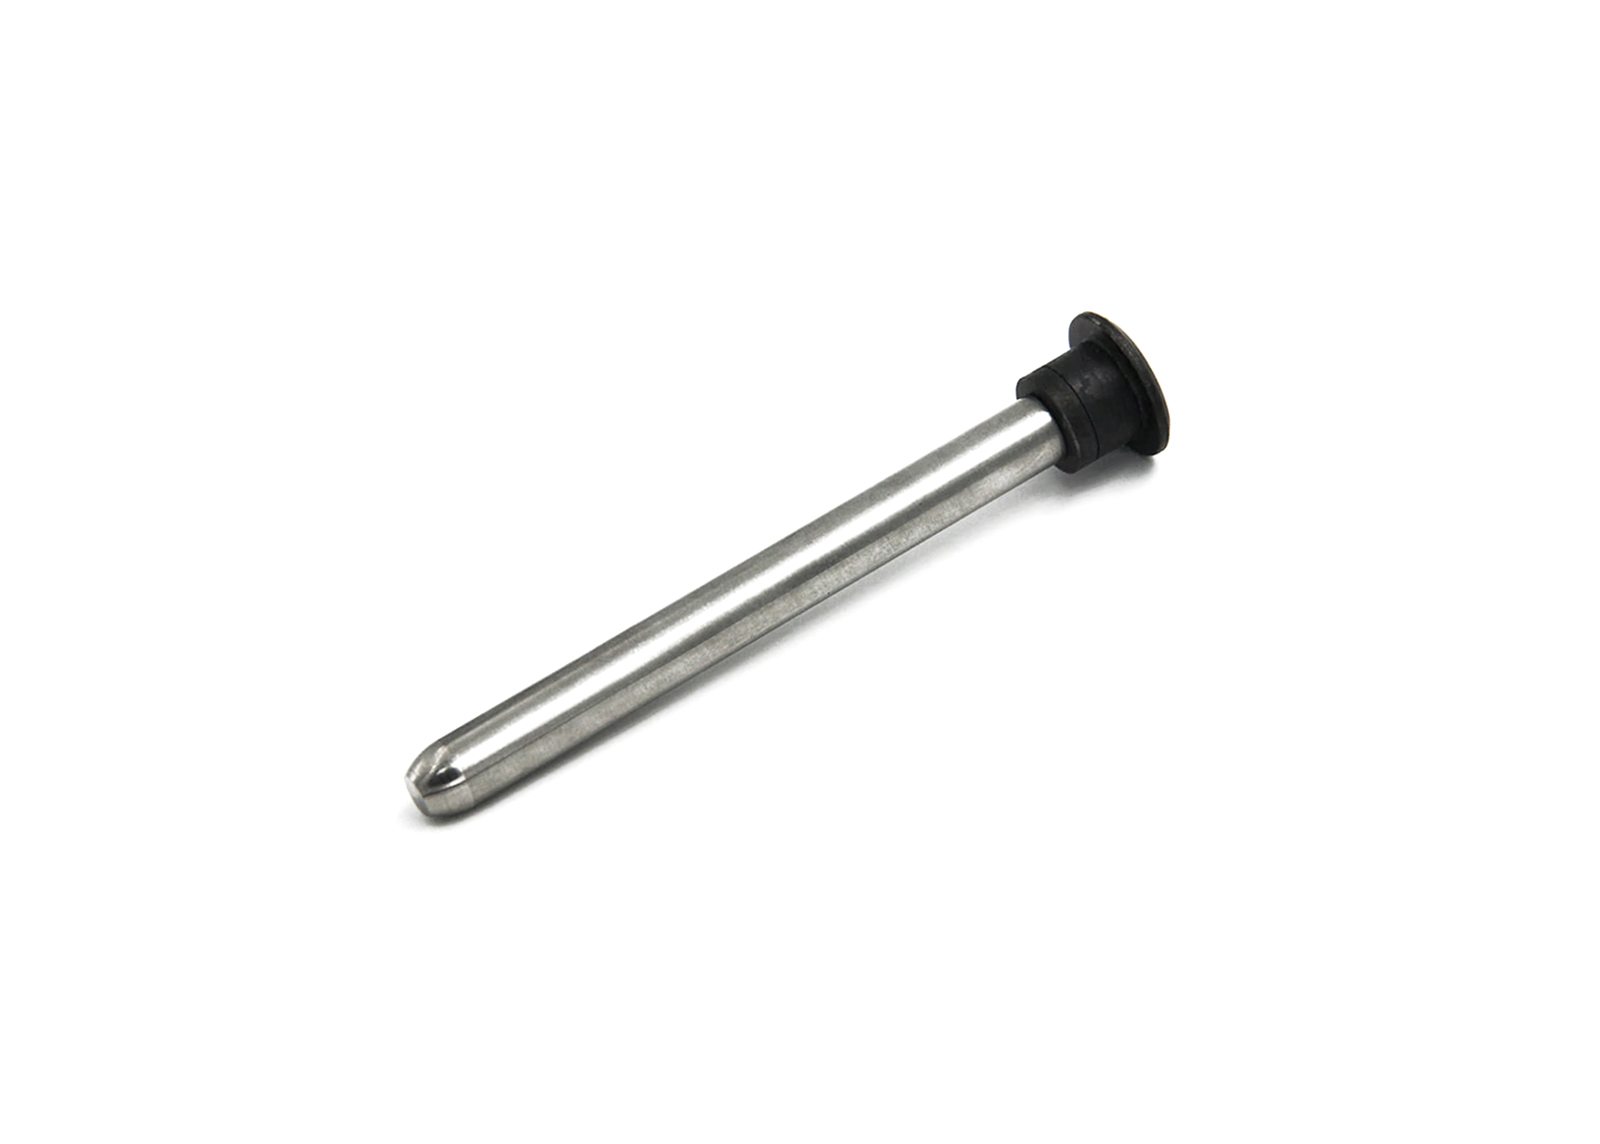 Stainless Spring Guide w/ rotary ring for MOD24/APS-2 Series (9mm) -Modify Bolt Action Rifle Parts